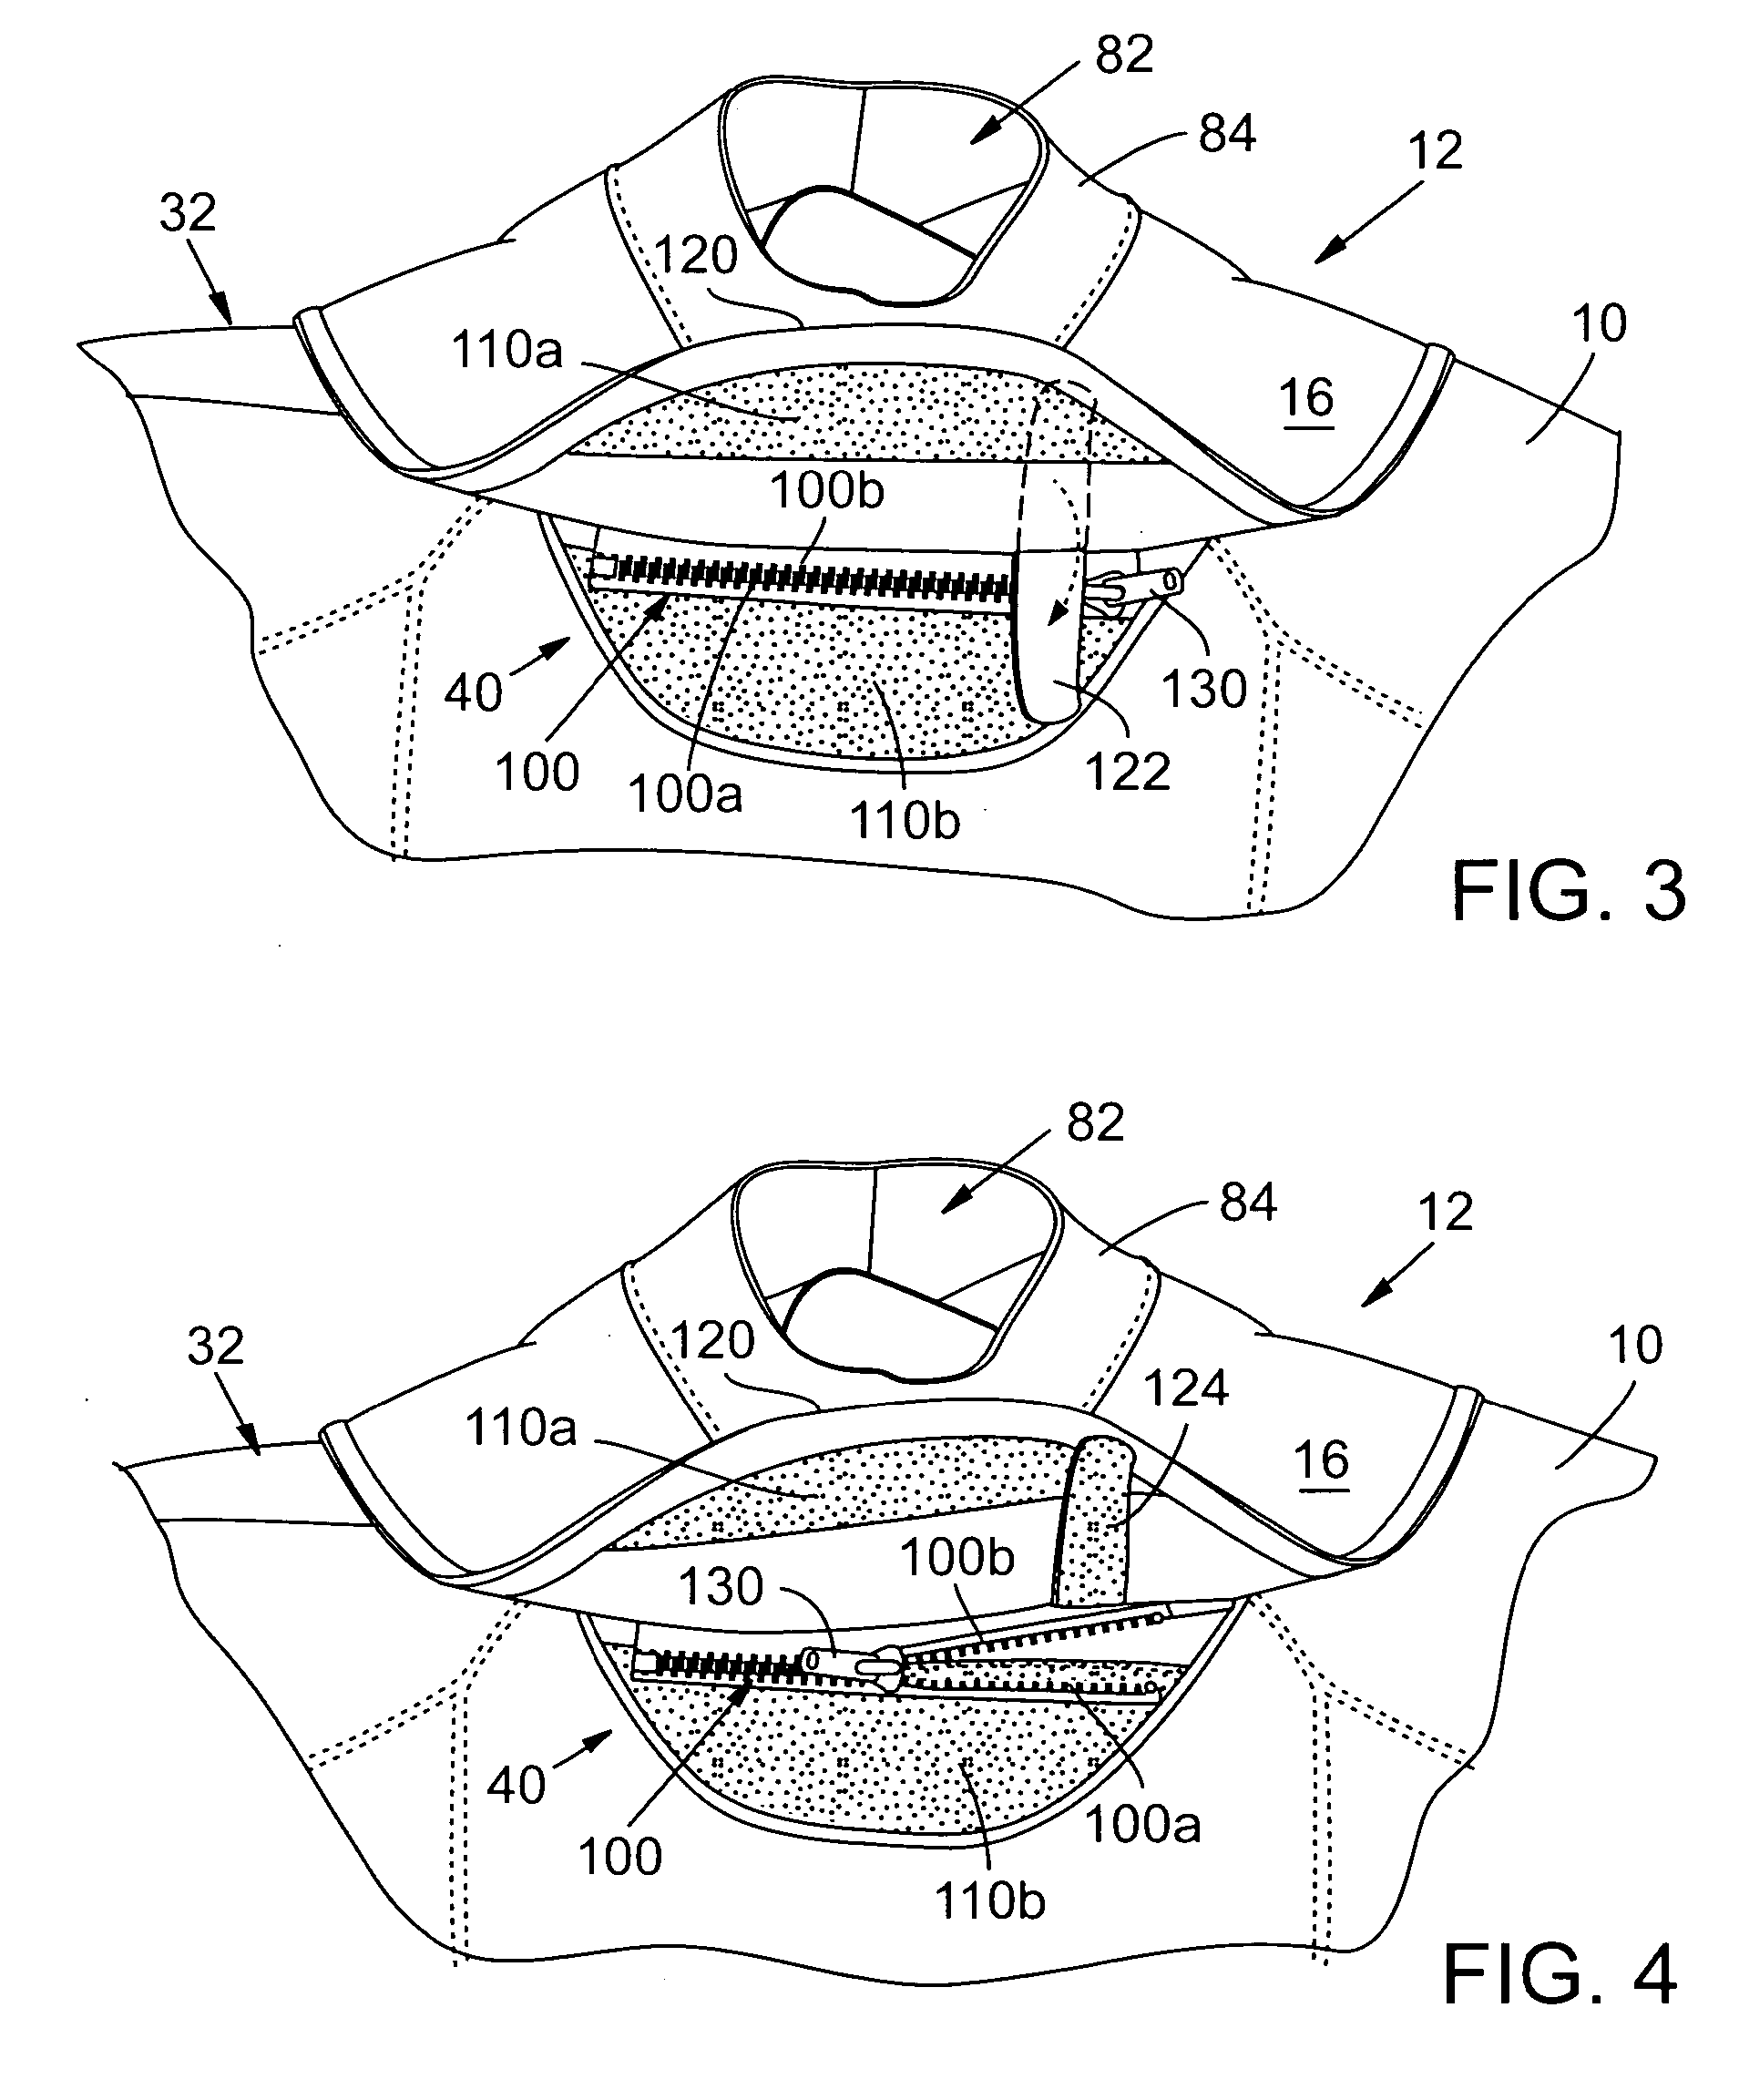 Wetsuit with flush resistant through shoulder entry system